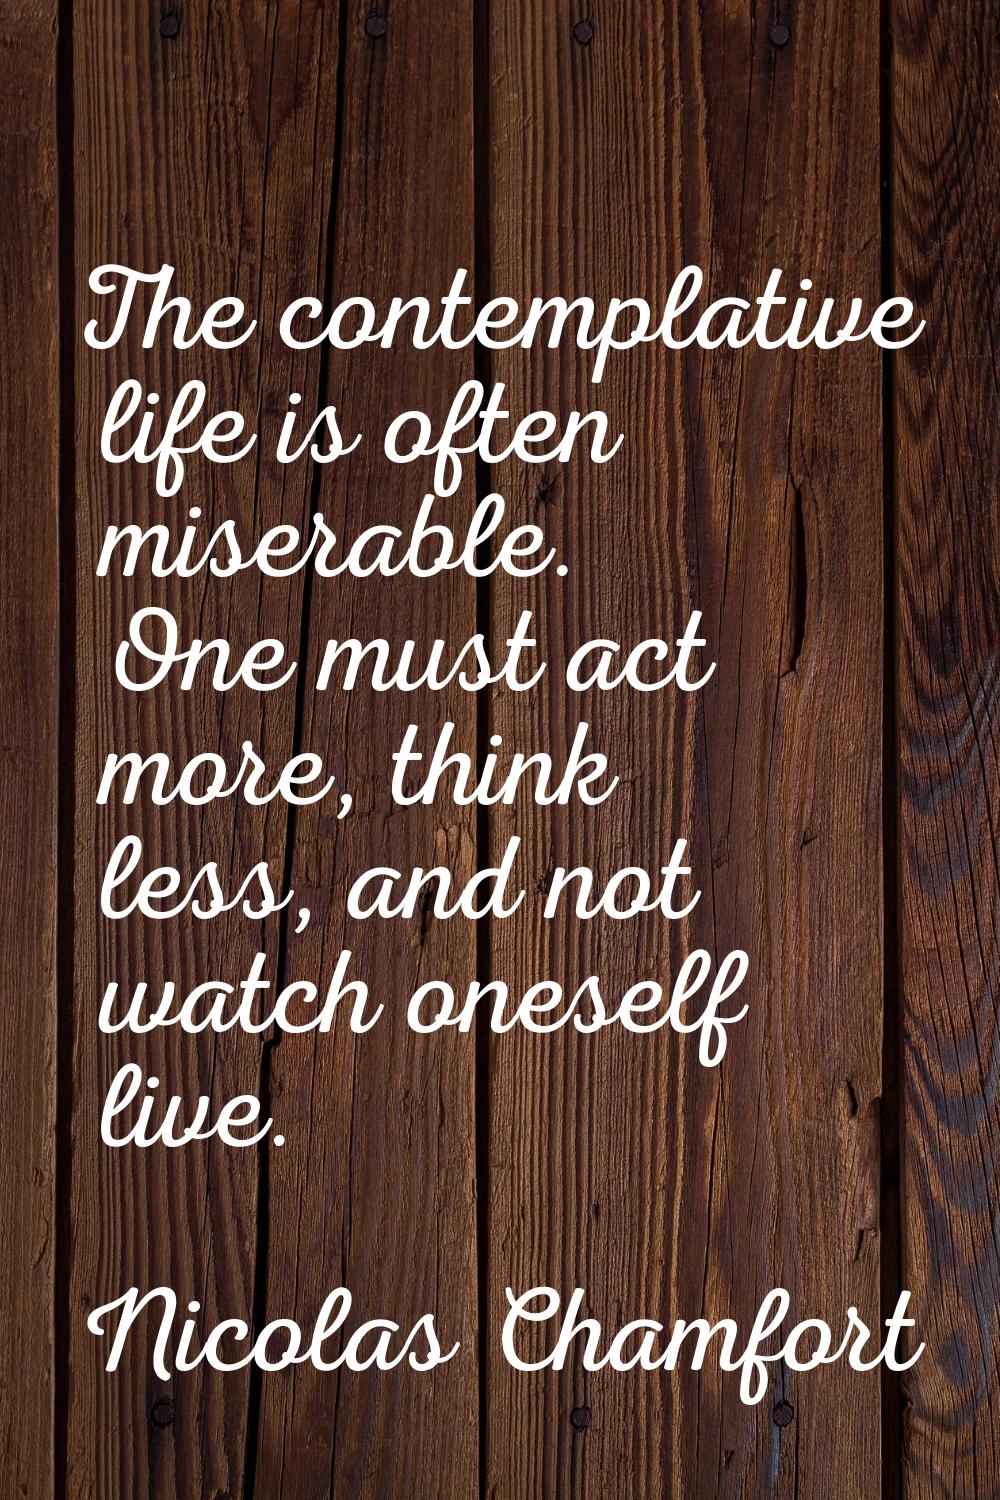 The contemplative life is often miserable. One must act more, think less, and not watch oneself liv